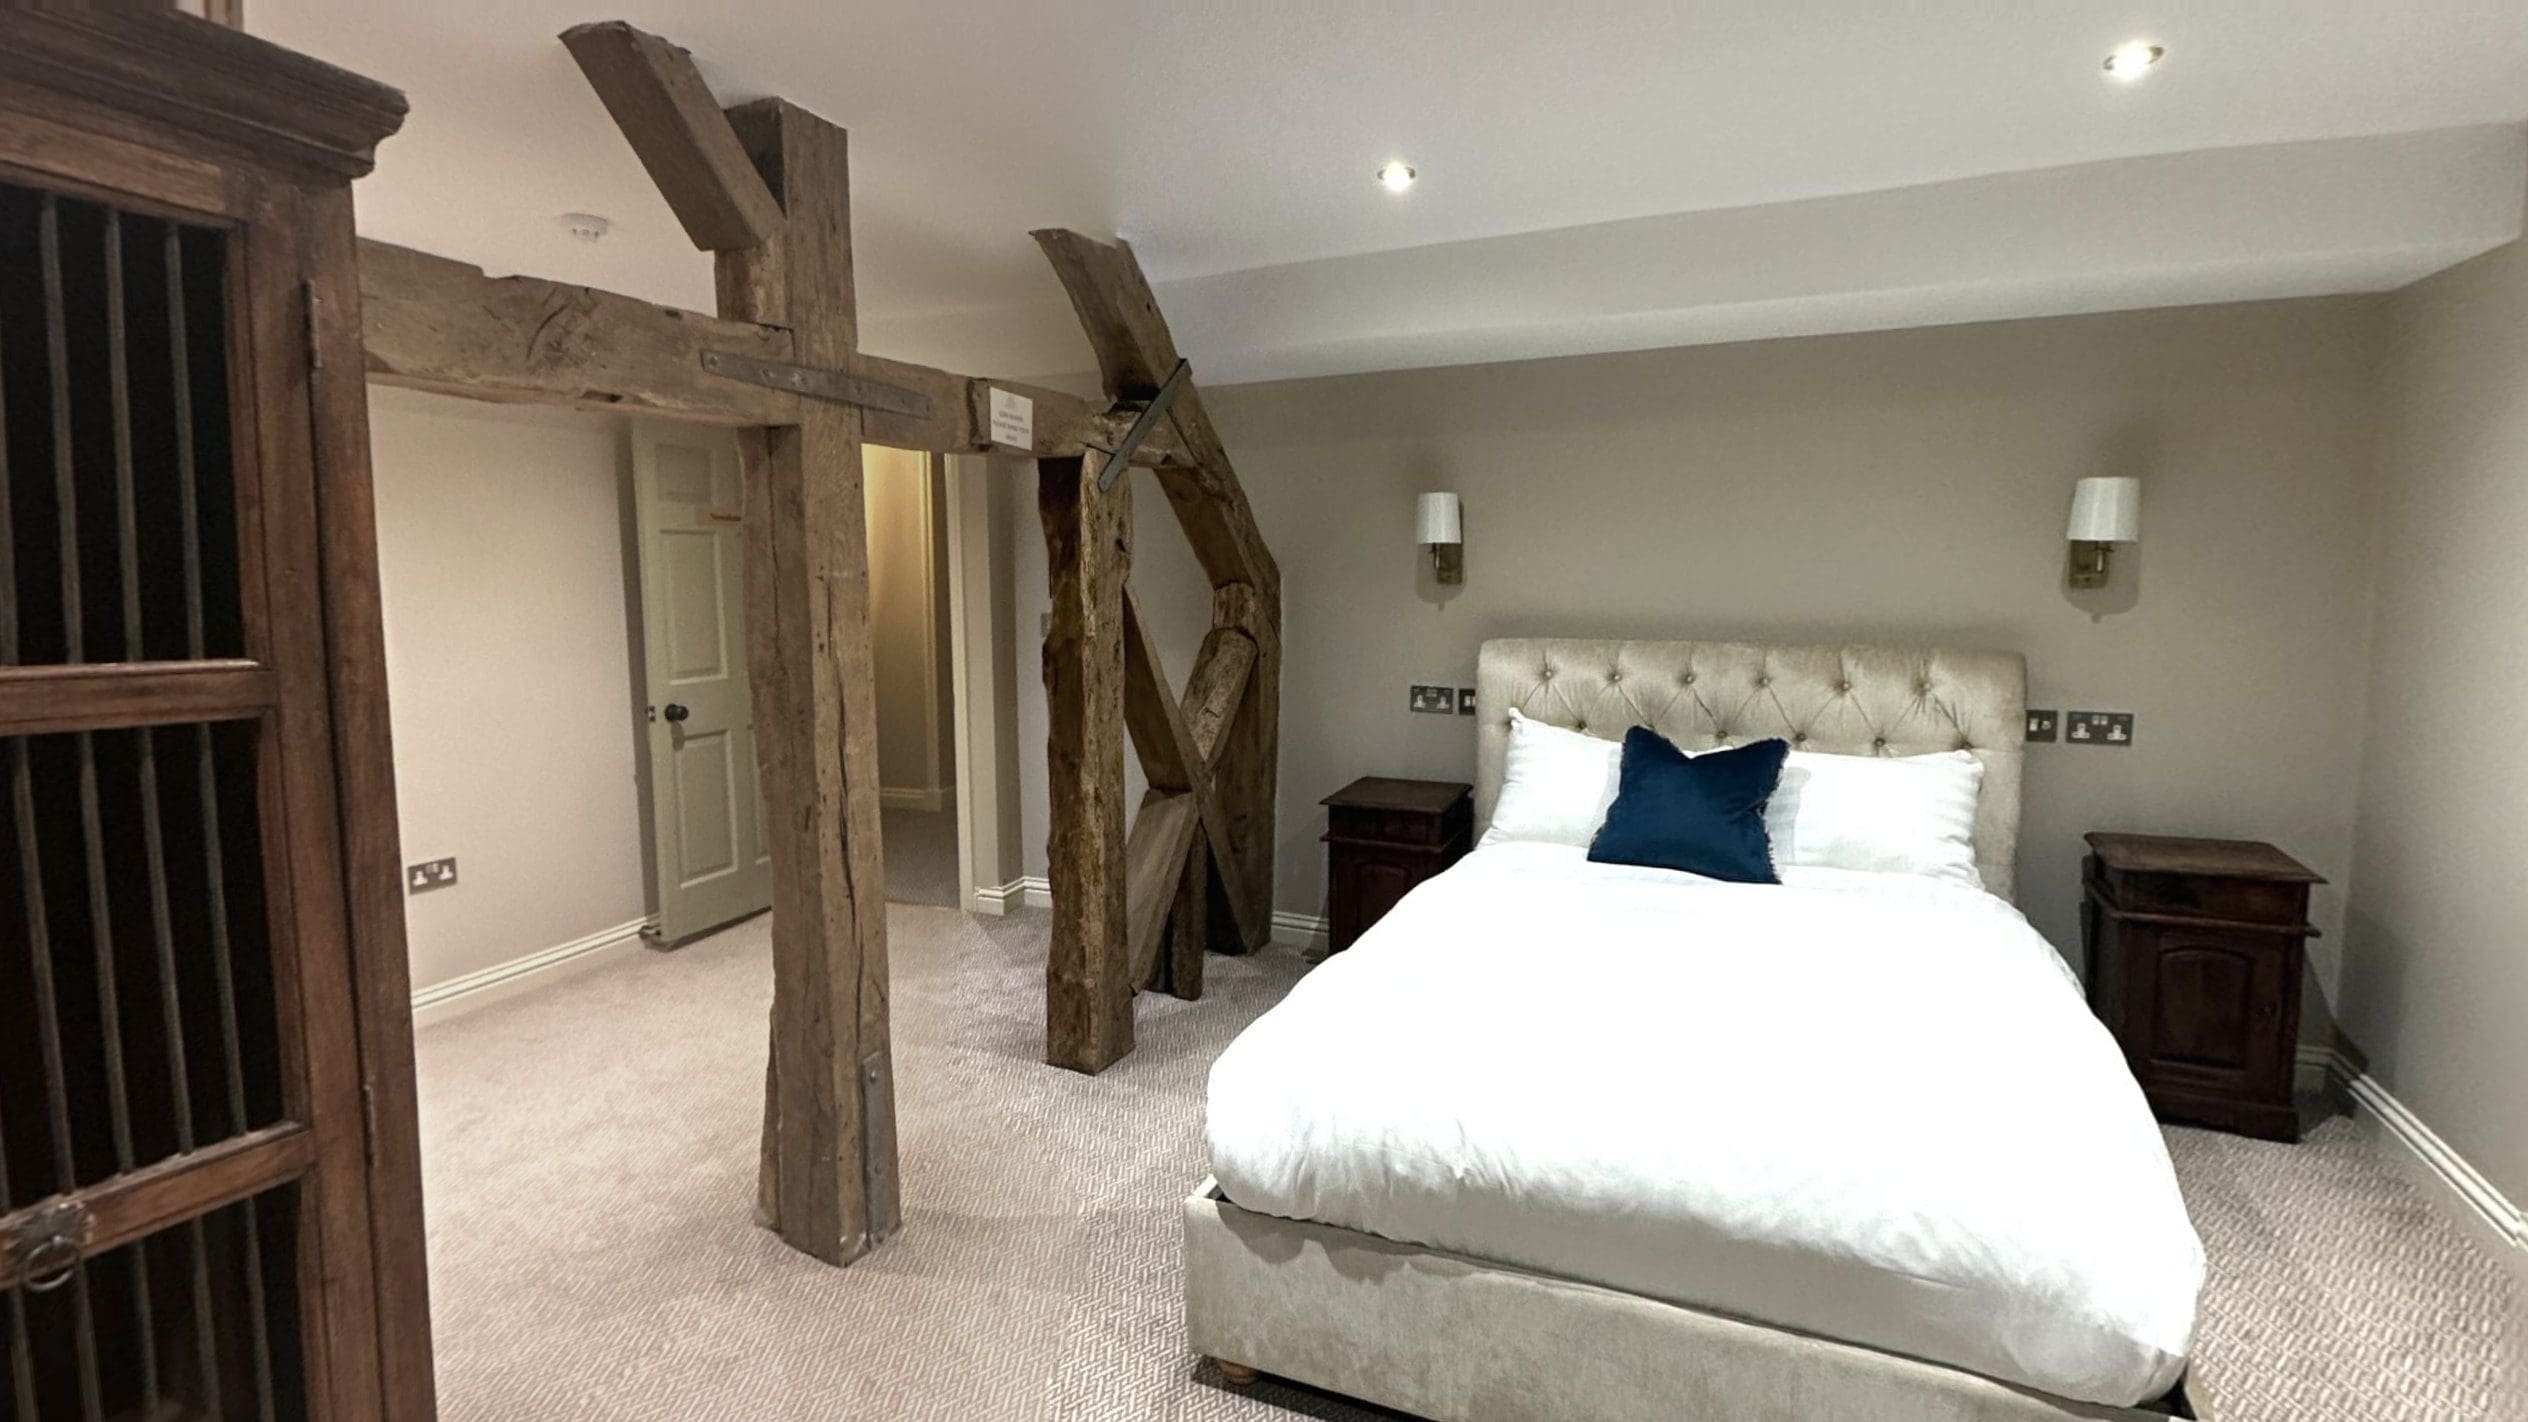 Newnham Suite bedroom with wooden beams at Owston Hall Hotel Doncaster